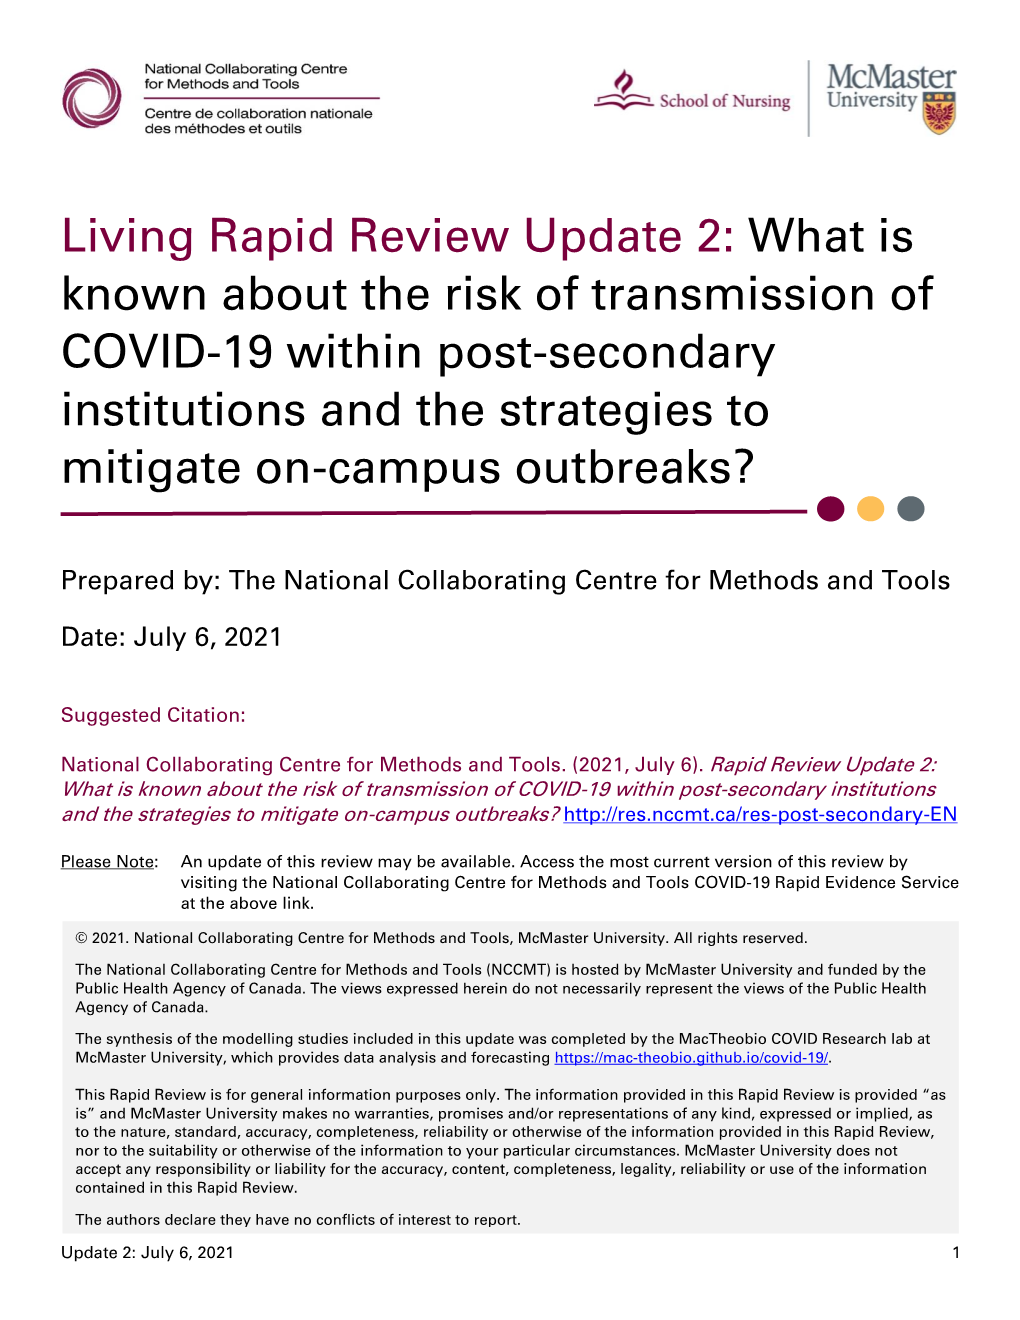 Known About the Risk of Transmission of COVID-19 Within Post-Secondary Institutions and the Strategies to Mitigate On-Campus Outbreaks?